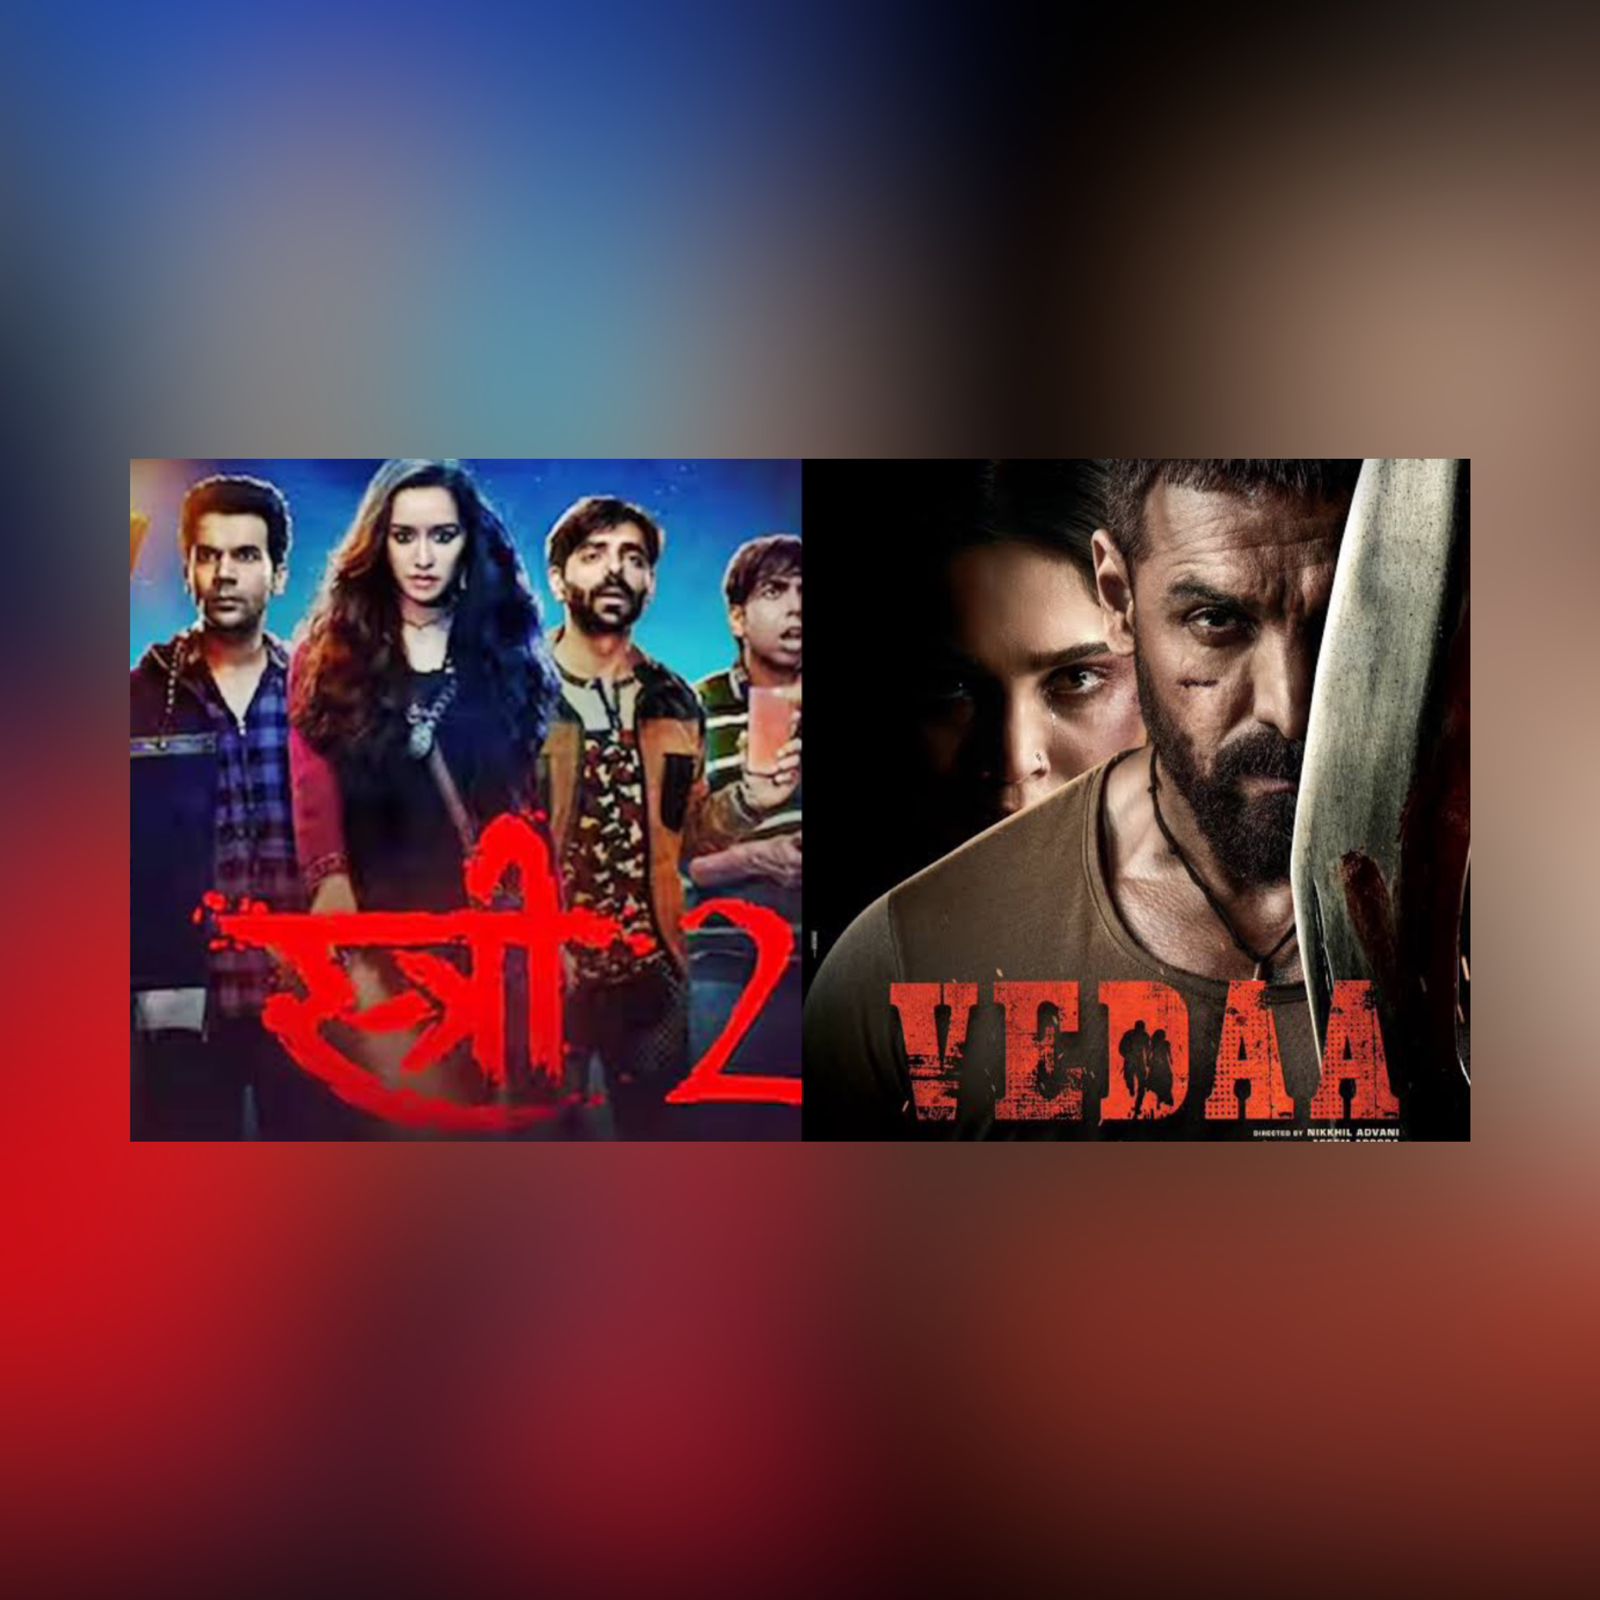 Stree 2 Vs Vedaa And More Clashes On Independence Day